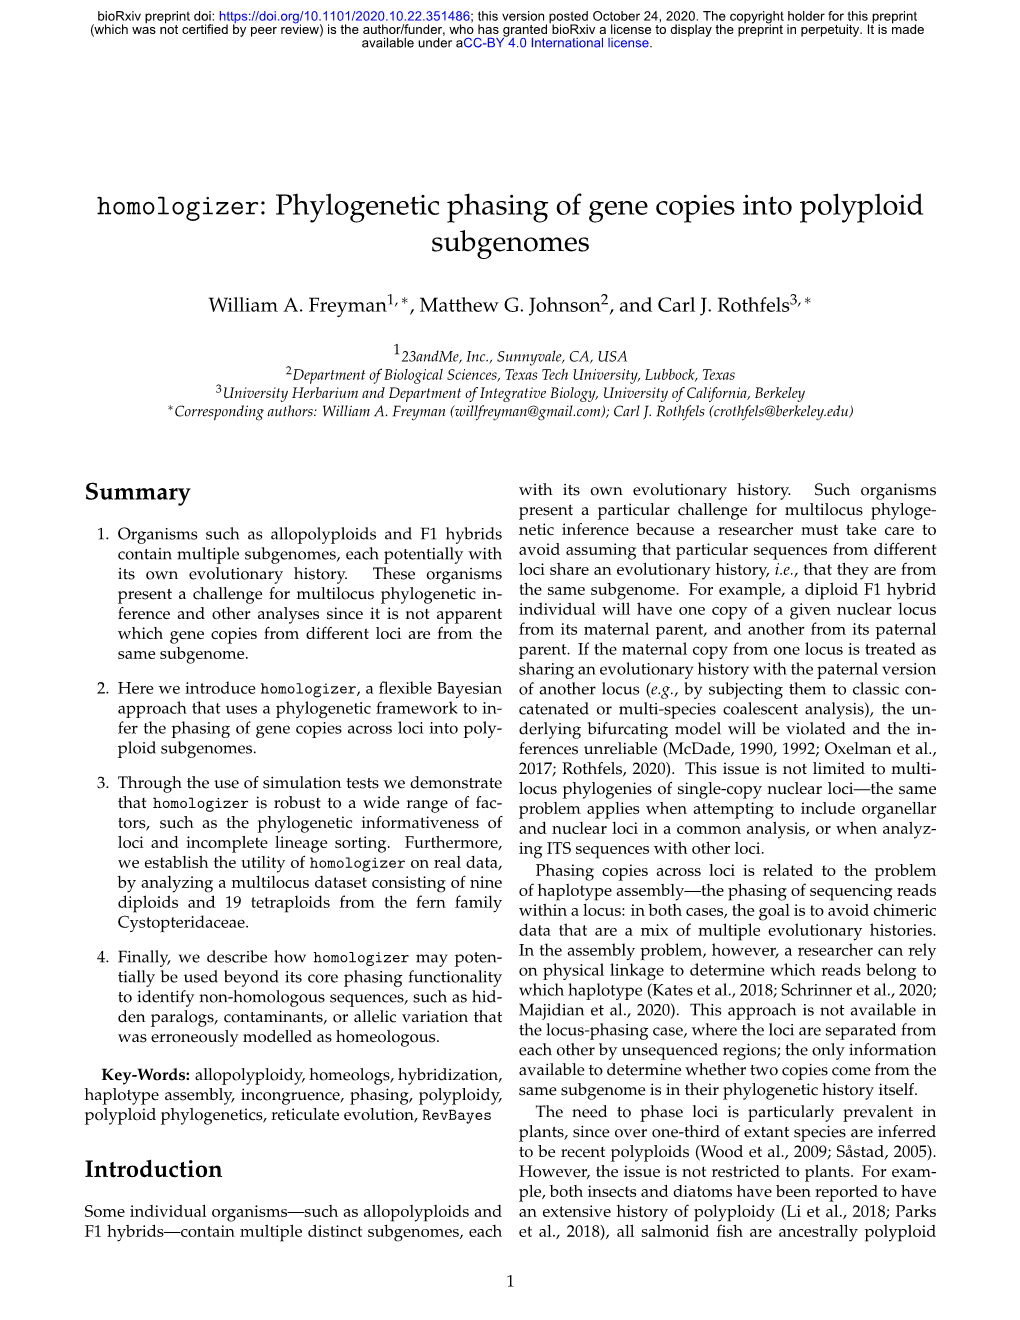 Phylogenetic Phasing of Gene Copies Into Polyploid Subgenomes